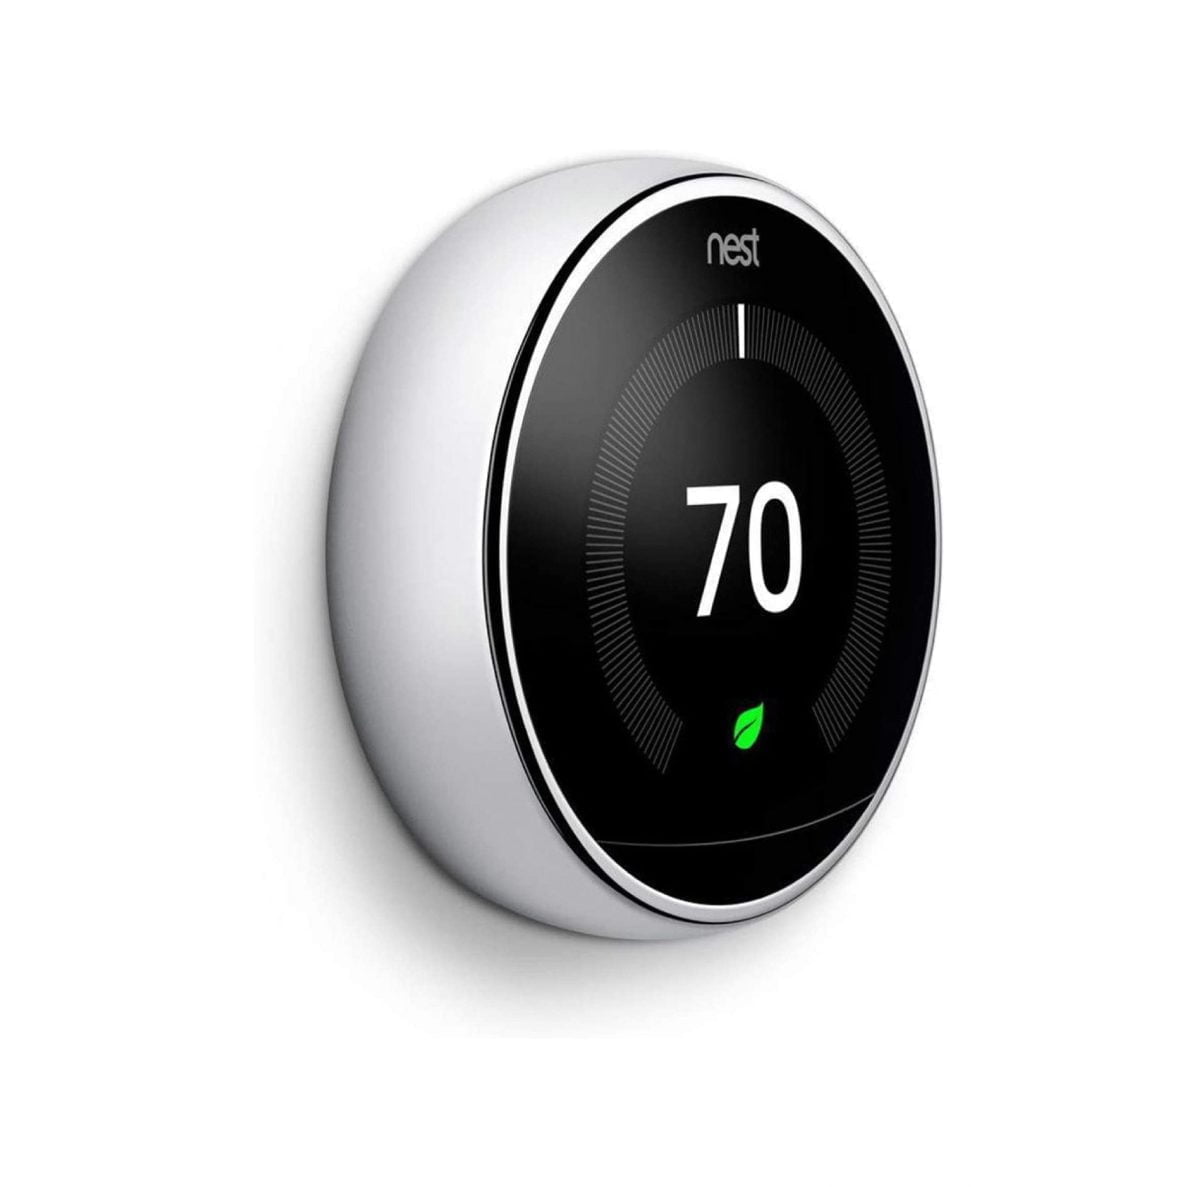 Wwwewe 04 Scaled Google &Lt;H1&Gt;Google Nest Learning Smart Wifi Thermostat 3Rd Gen - T3019Us Polished Steel&Lt;/H1&Gt; &Lt;Ul Class=&Quot;A-Unordered-List A-Vertical A-Spacing-Mini&Quot;&Gt; &Lt;Li&Gt;&Lt;Span Class=&Quot;A-List-Item&Quot;&Gt;Auto-Schedule: No More Confusing Programming. It Learns The Temperatures You Like And Programs Itself.&Lt;/Span&Gt;&Lt;/Li&Gt; &Lt;Li&Gt;&Lt;Span Class=&Quot;A-List-Item&Quot;&Gt;Wi-Fi Thermostat: Connect The Nest Thermostat To Wi-Fi To Change The Temperature From Your Phone, Tablet Or Laptop.&Lt;/Span&Gt;&Lt;/Li&Gt; &Lt;Li&Gt;&Lt;Span Class=&Quot;A-List-Item&Quot;&Gt;Energy Saving: You’ll See The Nest Leaf When You Choose A Temperature That Saves Energy. It Guides You In The Right Direction.&Lt;/Span&Gt;&Lt;/Li&Gt; &Lt;Li&Gt;&Lt;Span Class=&Quot;A-List-Item&Quot;&Gt;Smart Thermostat: Early-On Nest Learns How Your Home Warms Up And Keeps An Eye On The Weather To Get You The Temperature You Want When You Want It.&Lt;/Span&Gt;&Lt;/Li&Gt; &Lt;Li&Gt;&Lt;Span Class=&Quot;A-List-Item&Quot;&Gt;Home/Away Assist: The Nest Thermostat Automatically Turns Itself Down When You’re Away To Avoid Heating Or Cooling An Empty Home.&Lt;/Span&Gt;&Lt;/Li&Gt; &Lt;Li&Gt;&Lt;Span Class=&Quot;A-List-Item&Quot;&Gt;Works With Amazon Alexa For Voice Control (Alexa Device Sold Separately)&Lt;/Span&Gt;&Lt;/Li&Gt; &Lt;Li&Gt;&Lt;Span Class=&Quot;A-List-Item&Quot;&Gt;&Lt;Span Class=&Quot;A-List-Item&Quot;&Gt;Auto-Schedule: Nest Learns The Temperatures You Like And Programs Itself In About A Week.&Lt;/Span&Gt;&Lt;/Span&Gt; &Lt;H5&Gt;Note : Direct Replacement Warranty One Year&Lt;/H5&Gt; &Lt;Div Class=&Quot;Html-Fragment&Quot;&Gt; &Lt;Div&Gt; &Lt;B&Gt;We Also Provide International Wholesale And Retail Shipping To All Gcc Countries: Saudi Arabia, Qatar, Oman, Kuwait, Bahrain.&Lt;/B&Gt; &Lt;/Div&Gt; &Lt;/Div&Gt;&Lt;/Li&Gt; &Lt;/Ul&Gt; &Lt;Div Class=&Quot;A-Row A-Expander-Container A-Expander-Inline-Container&Quot; Aria-Live=&Quot;Polite&Quot;&Gt; &Lt;Div Class=&Quot;A-Expander-Content A-Expander-Extend-Content A-Expander-Content-Expanded&Quot; Aria-Expanded=&Quot;True&Quot;&Gt;&Lt;/Div&Gt; &Lt;/Div&Gt; Google Nest Google Nest Learning Smart Wifi Thermostat 3Rd Gen - T3019Us Polished Steel